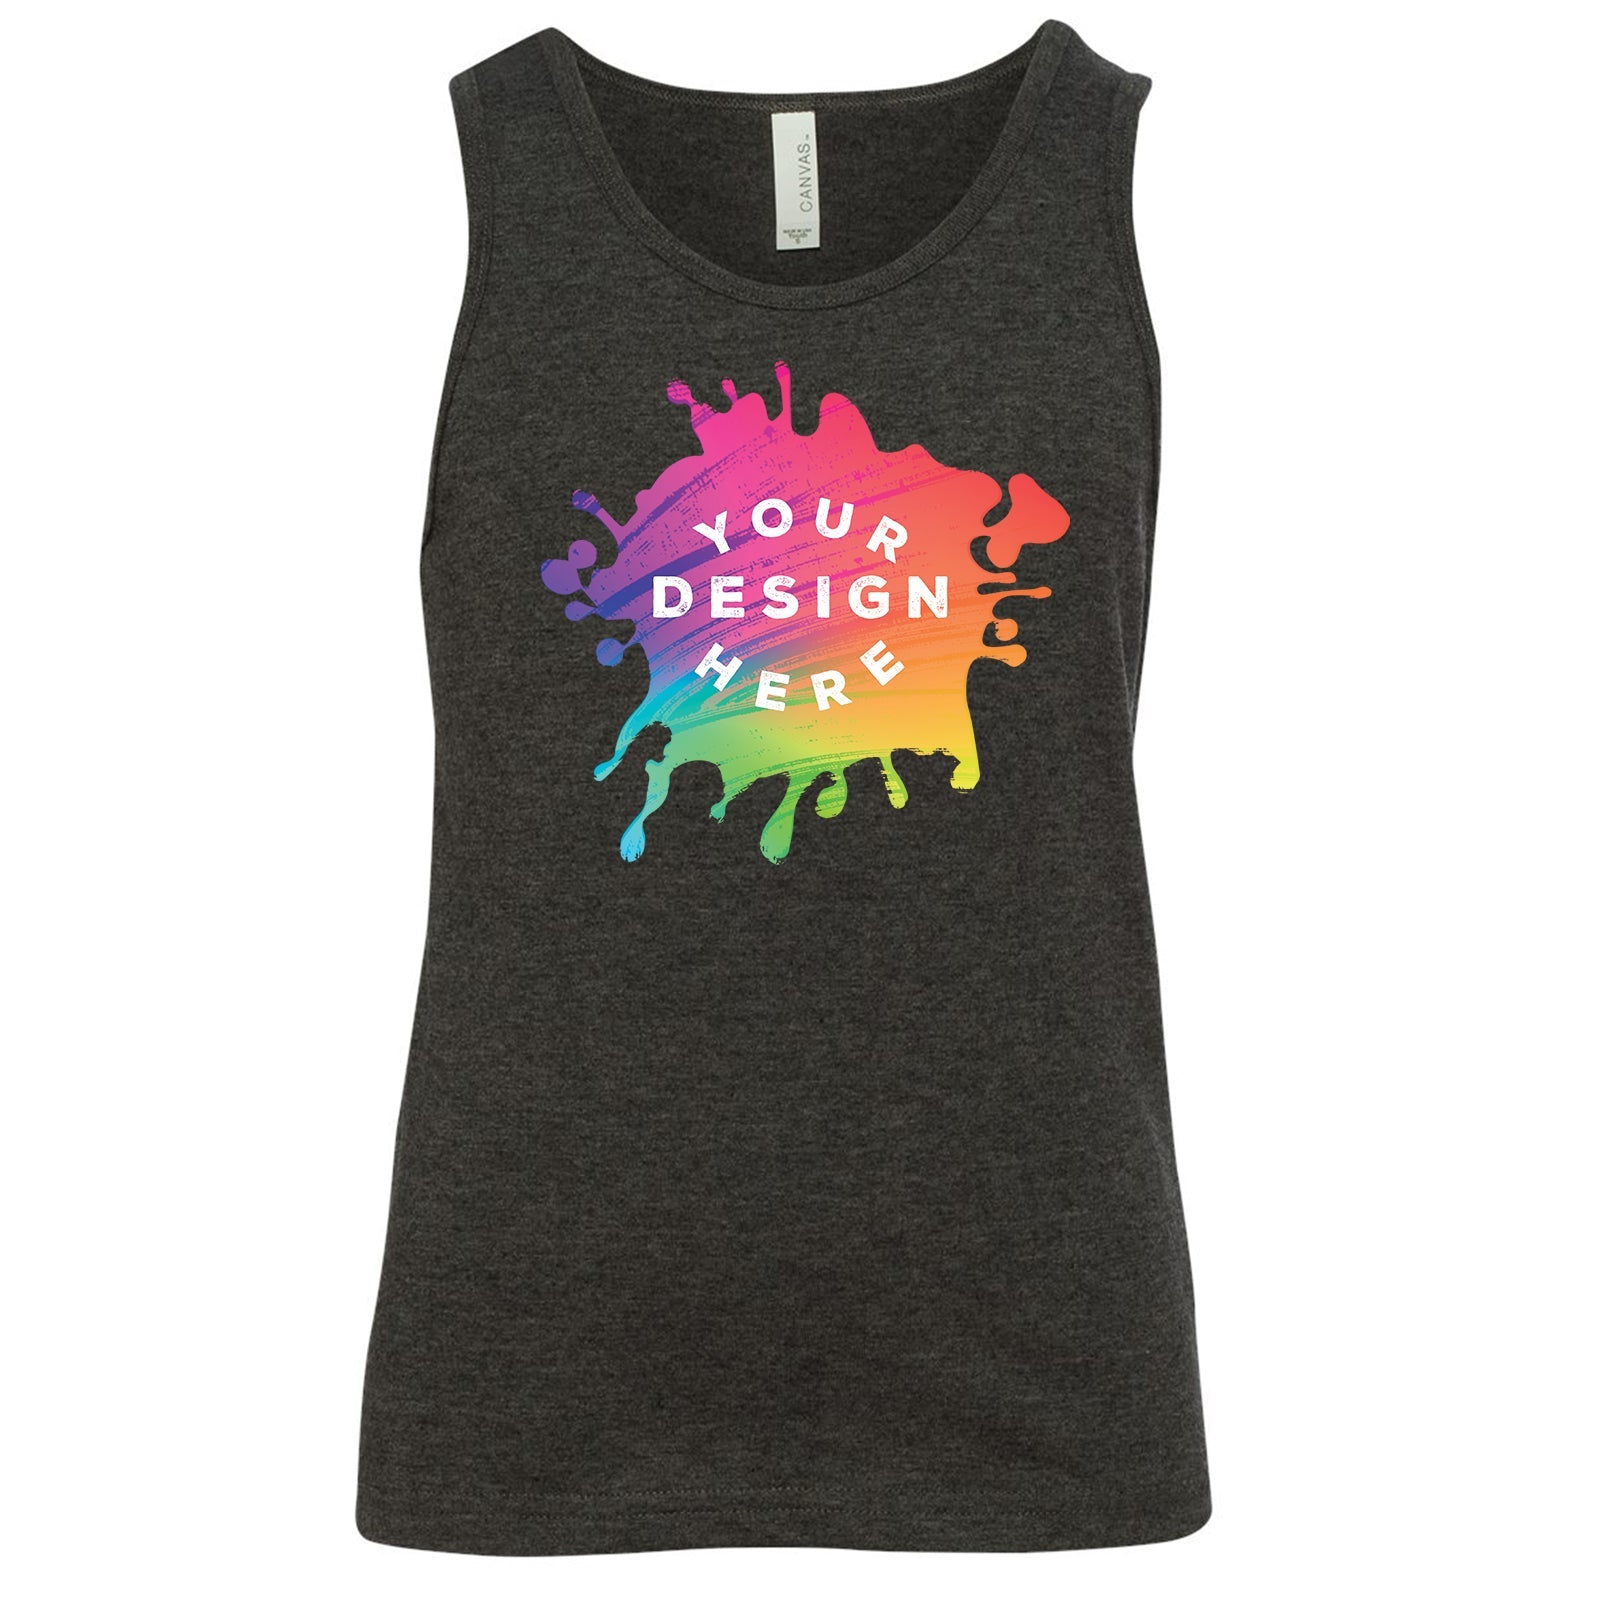 Bella + Canvas Youth Unisex 100% Cotton Jersey Tank Top